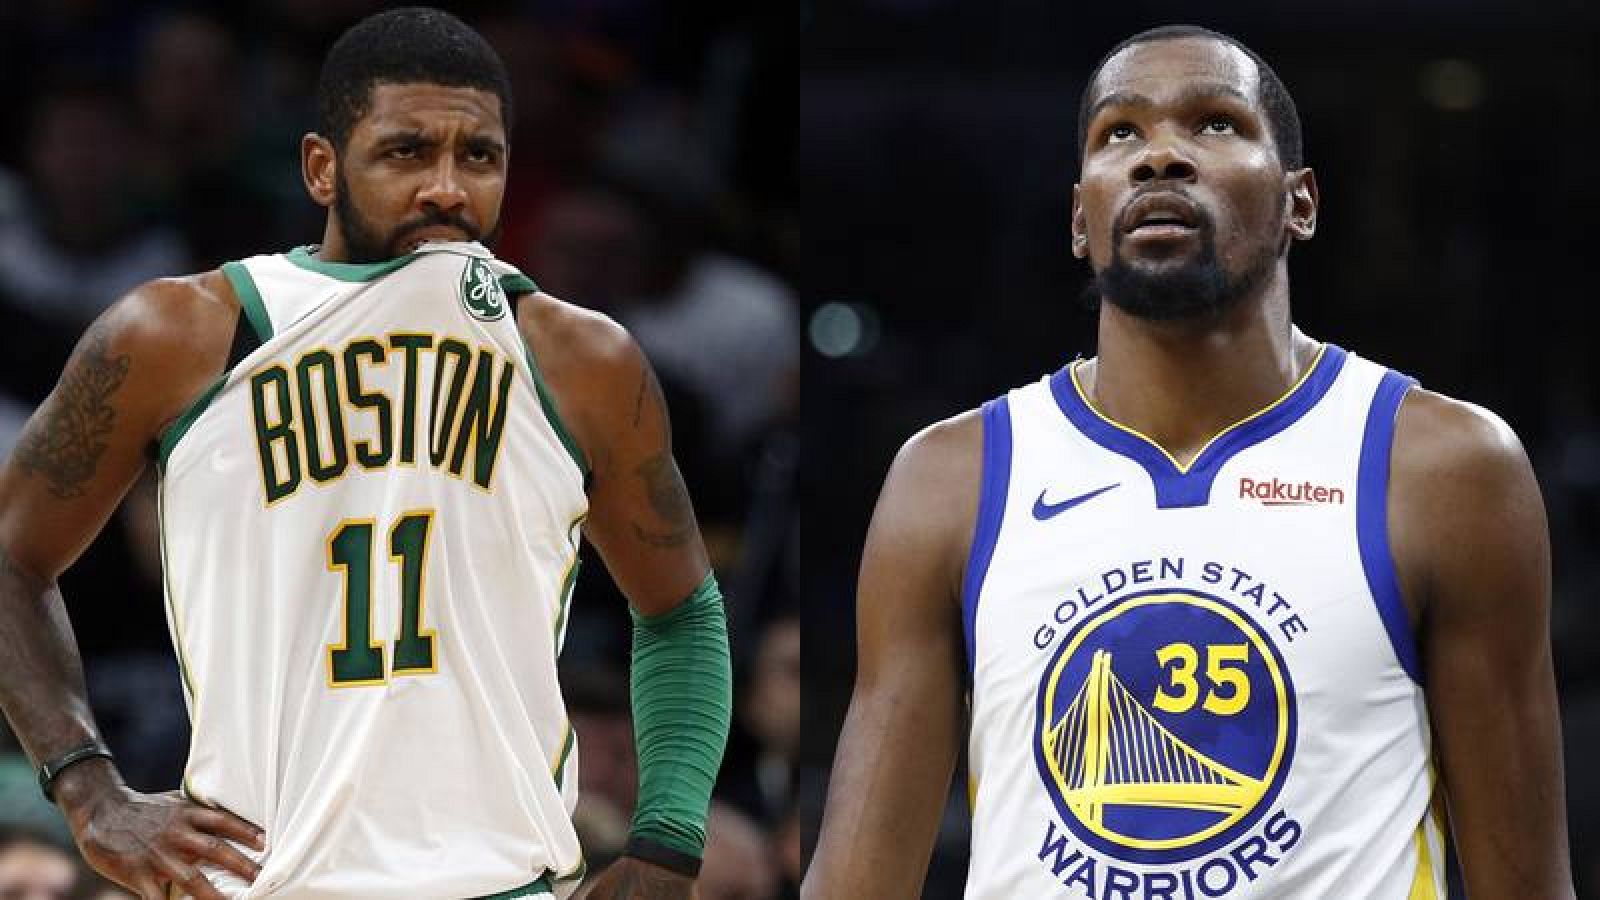 Kyrie Irving (Boston Celtics) y Kevin Durant (Golden State Warriors)